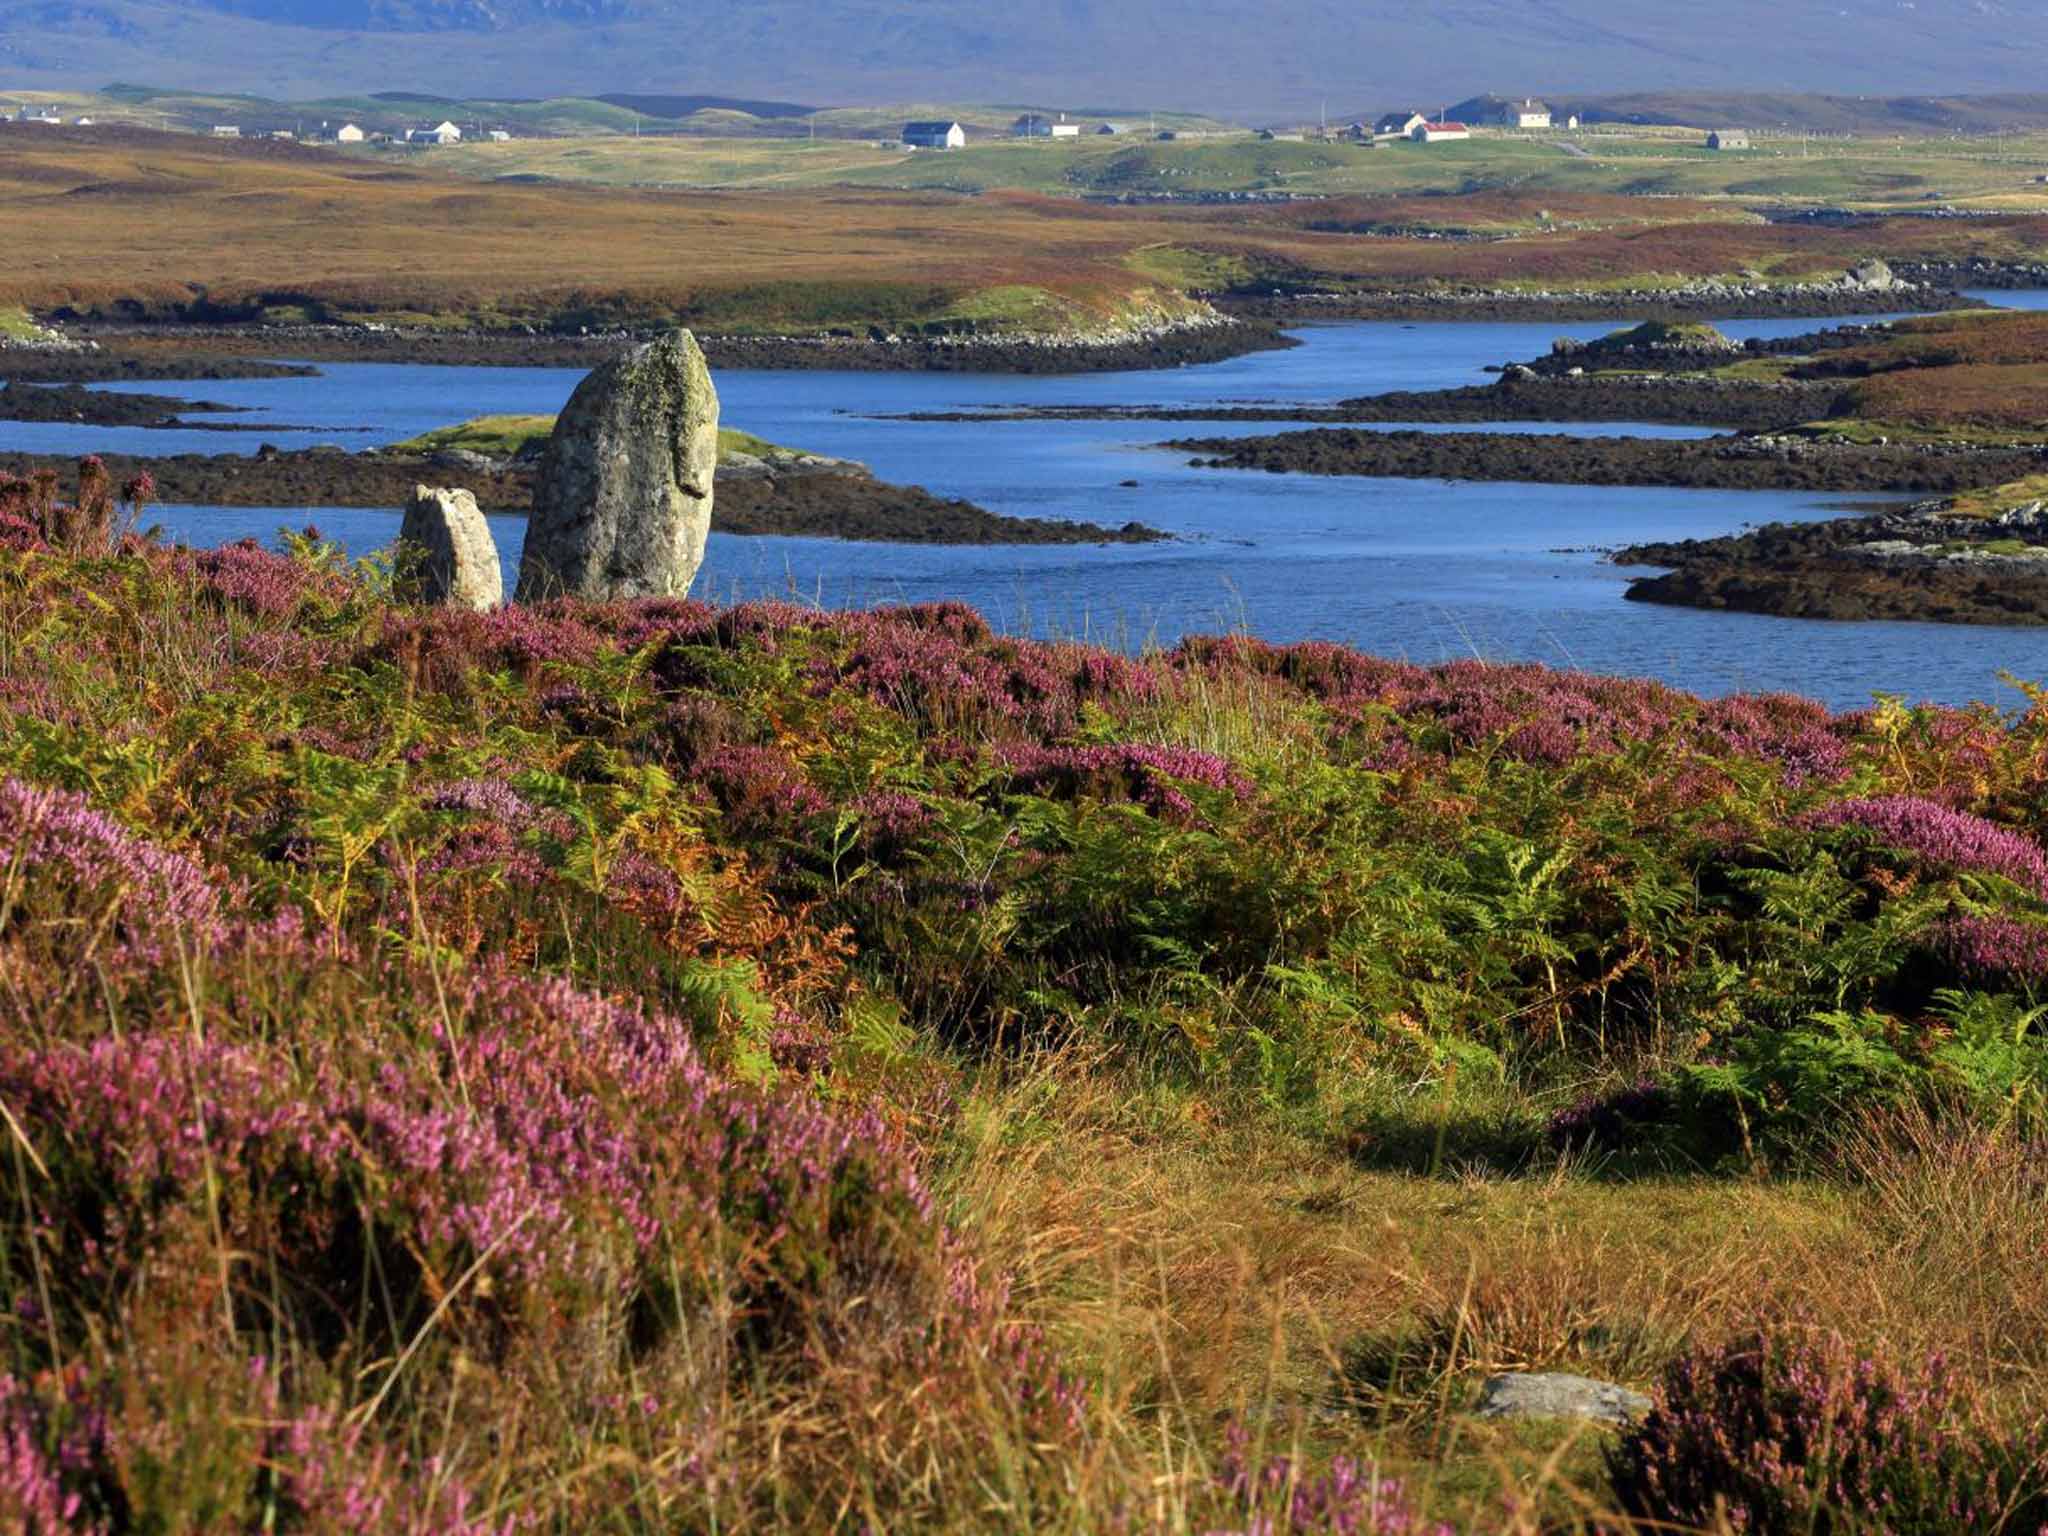 The Outer Hebrides ranks highest in the UK, according to ONS wellbeing data